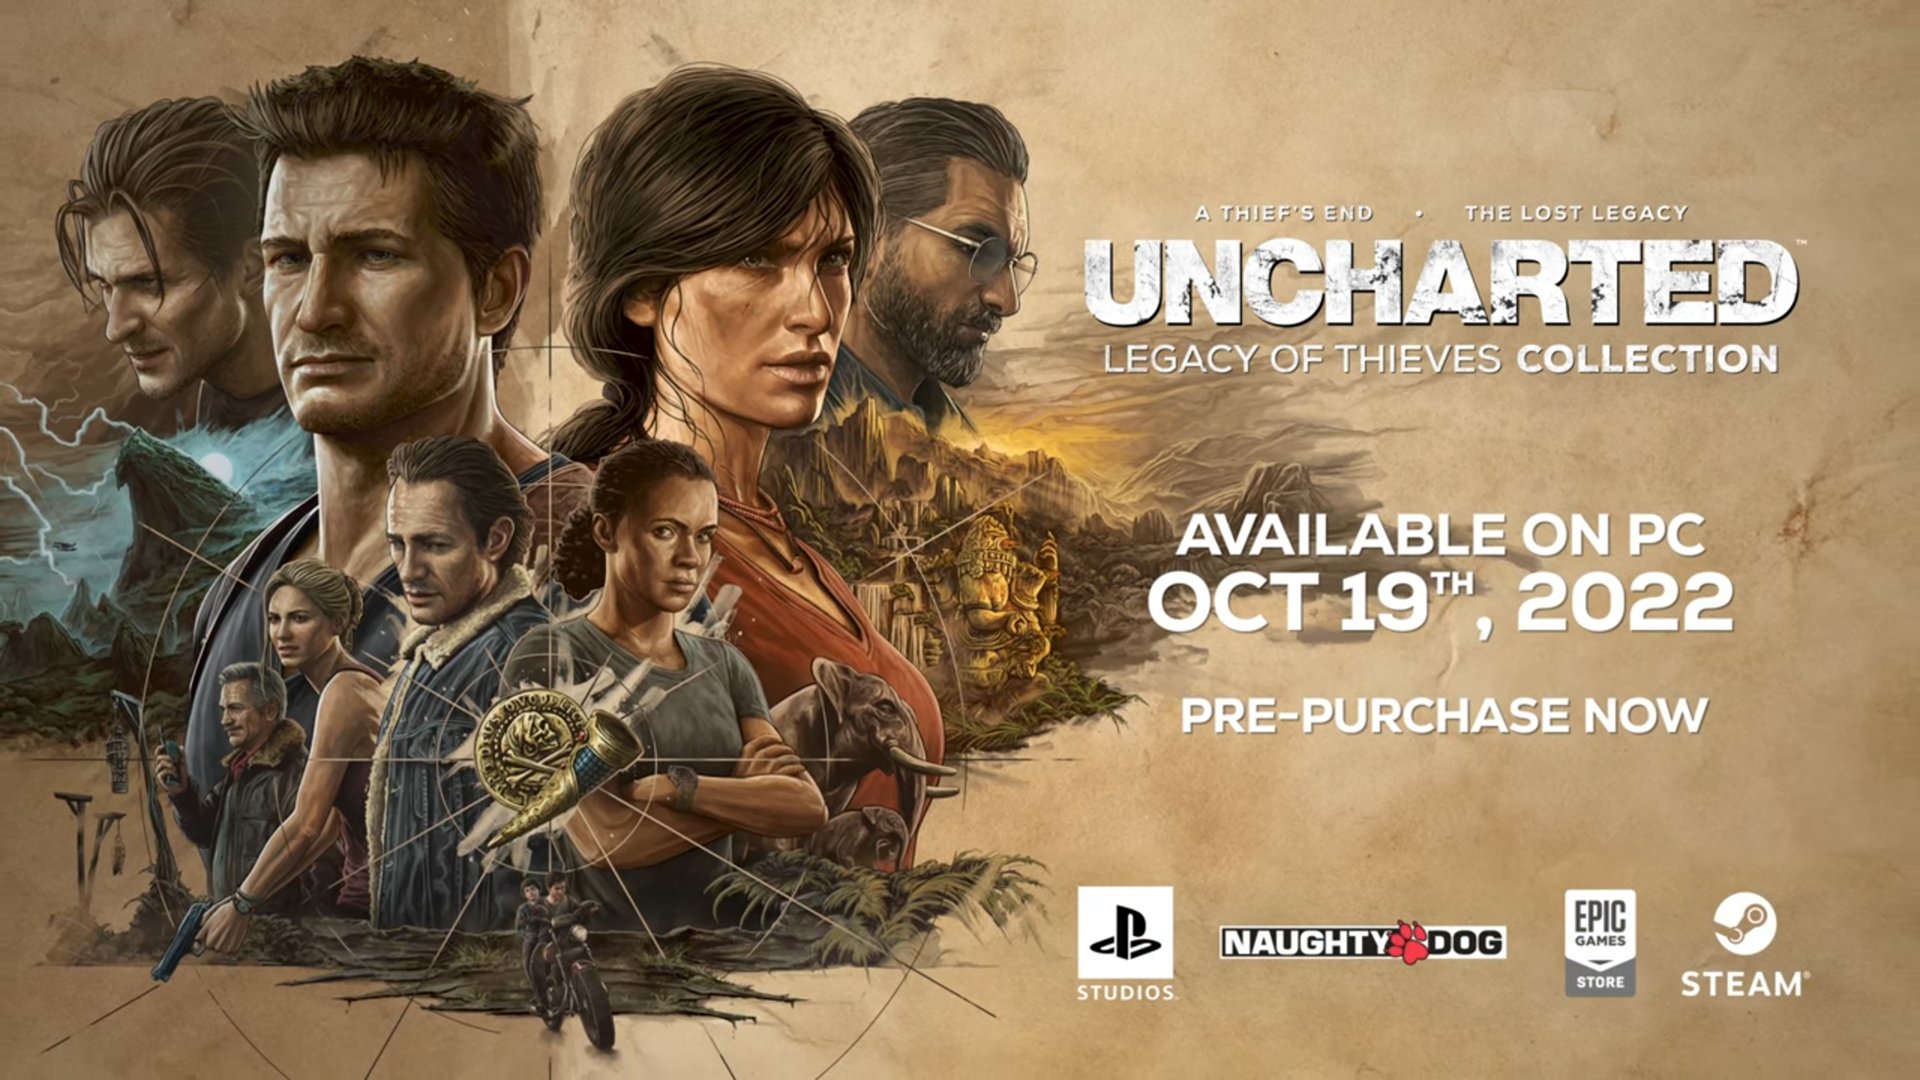 A promotional image from Uncharted: Legacy of Thieves collection showing different characters and the release date of October 15